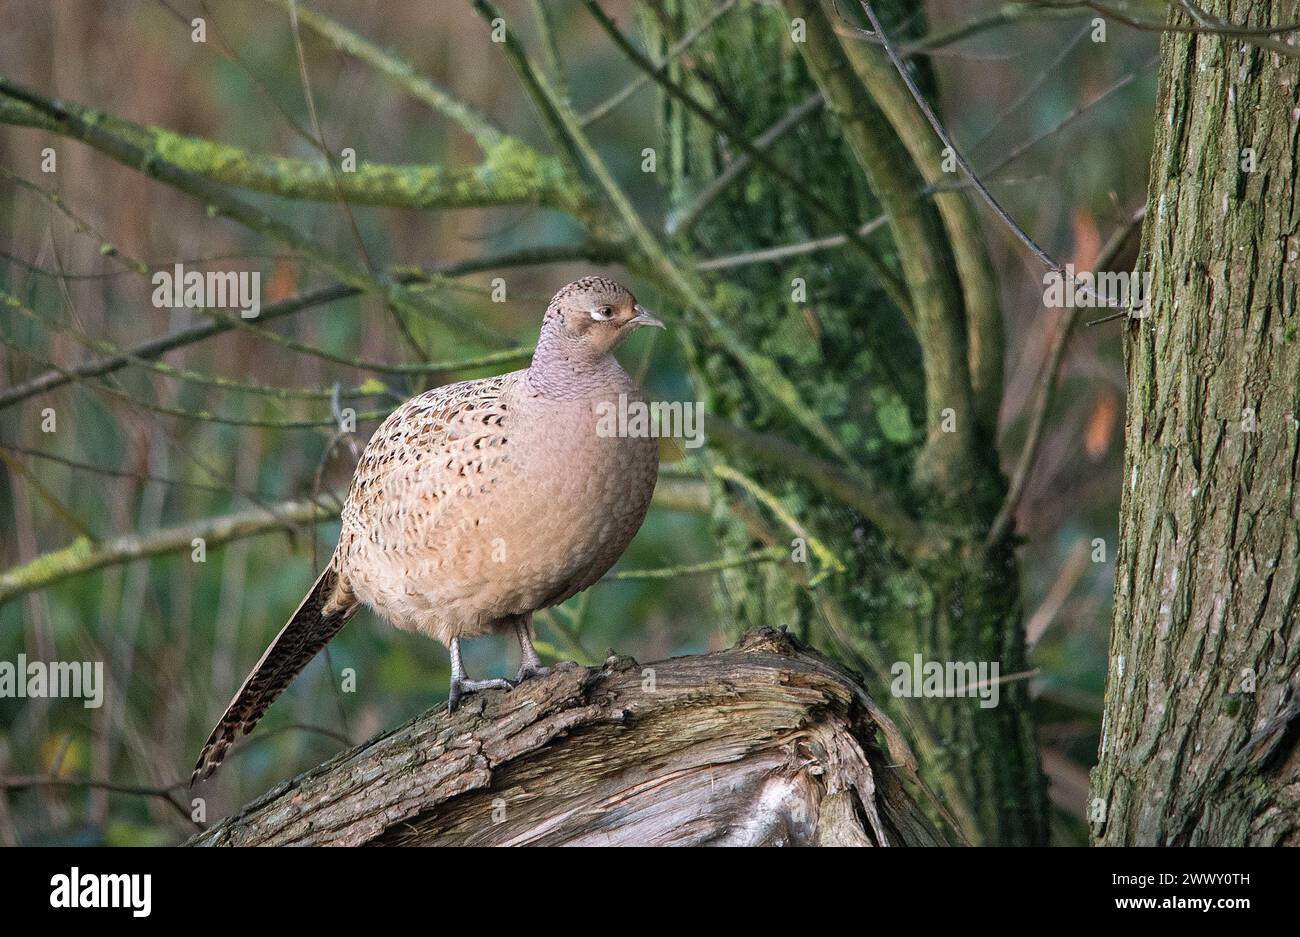 Female Pheasant in close view perched on tree stump and looking to the right in image Stock Photo